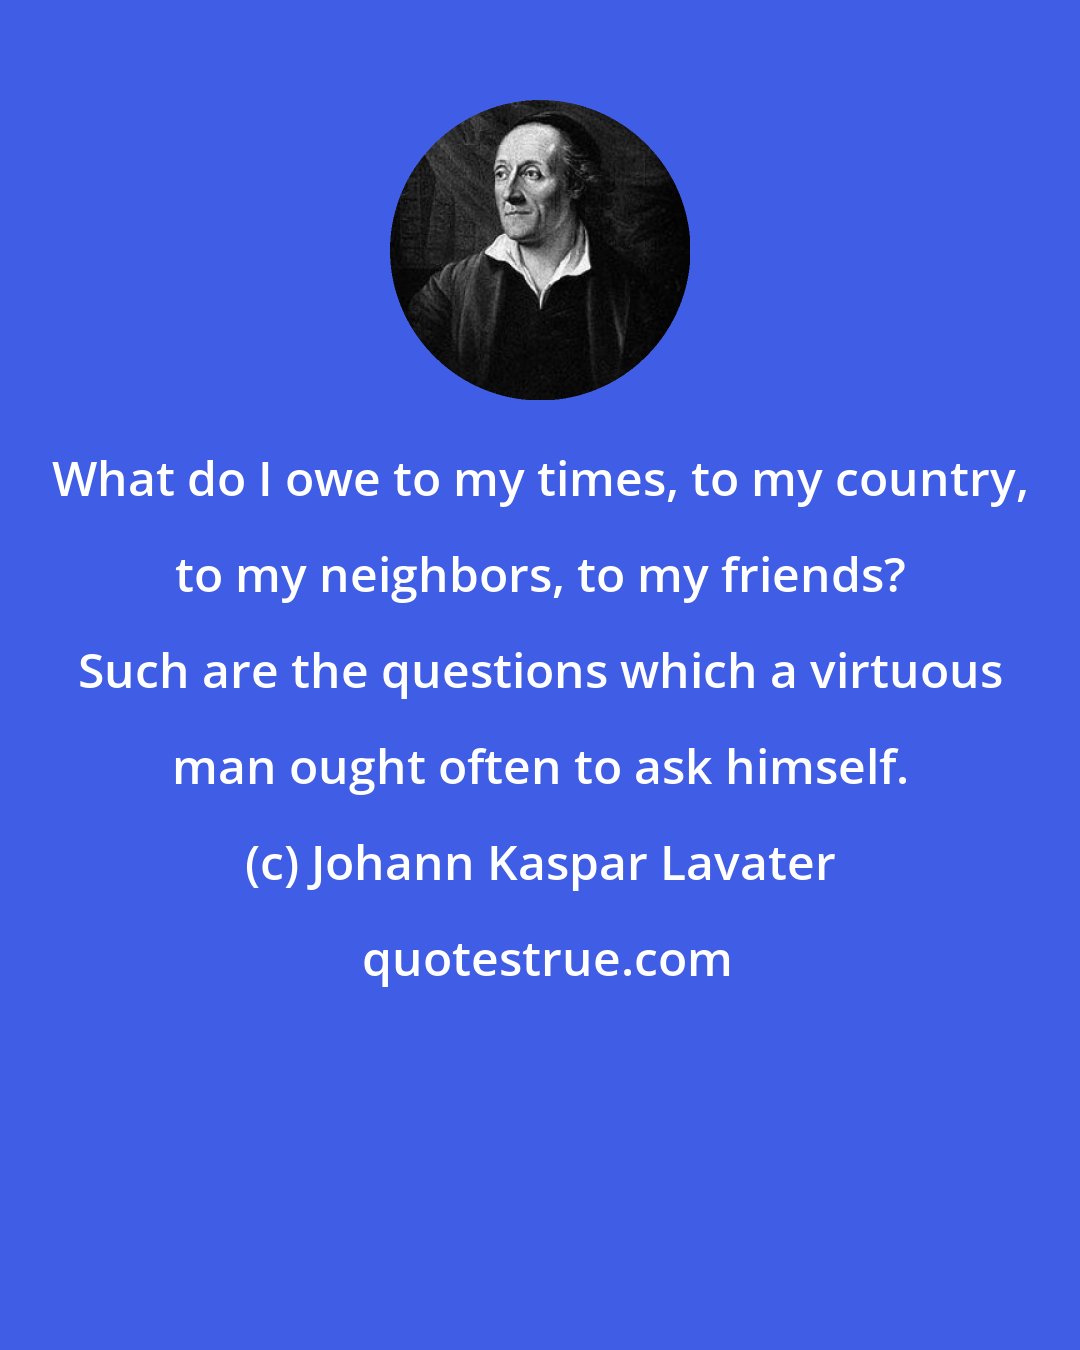 Johann Kaspar Lavater: What do I owe to my times, to my country, to my neighbors, to my friends? Such are the questions which a virtuous man ought often to ask himself.